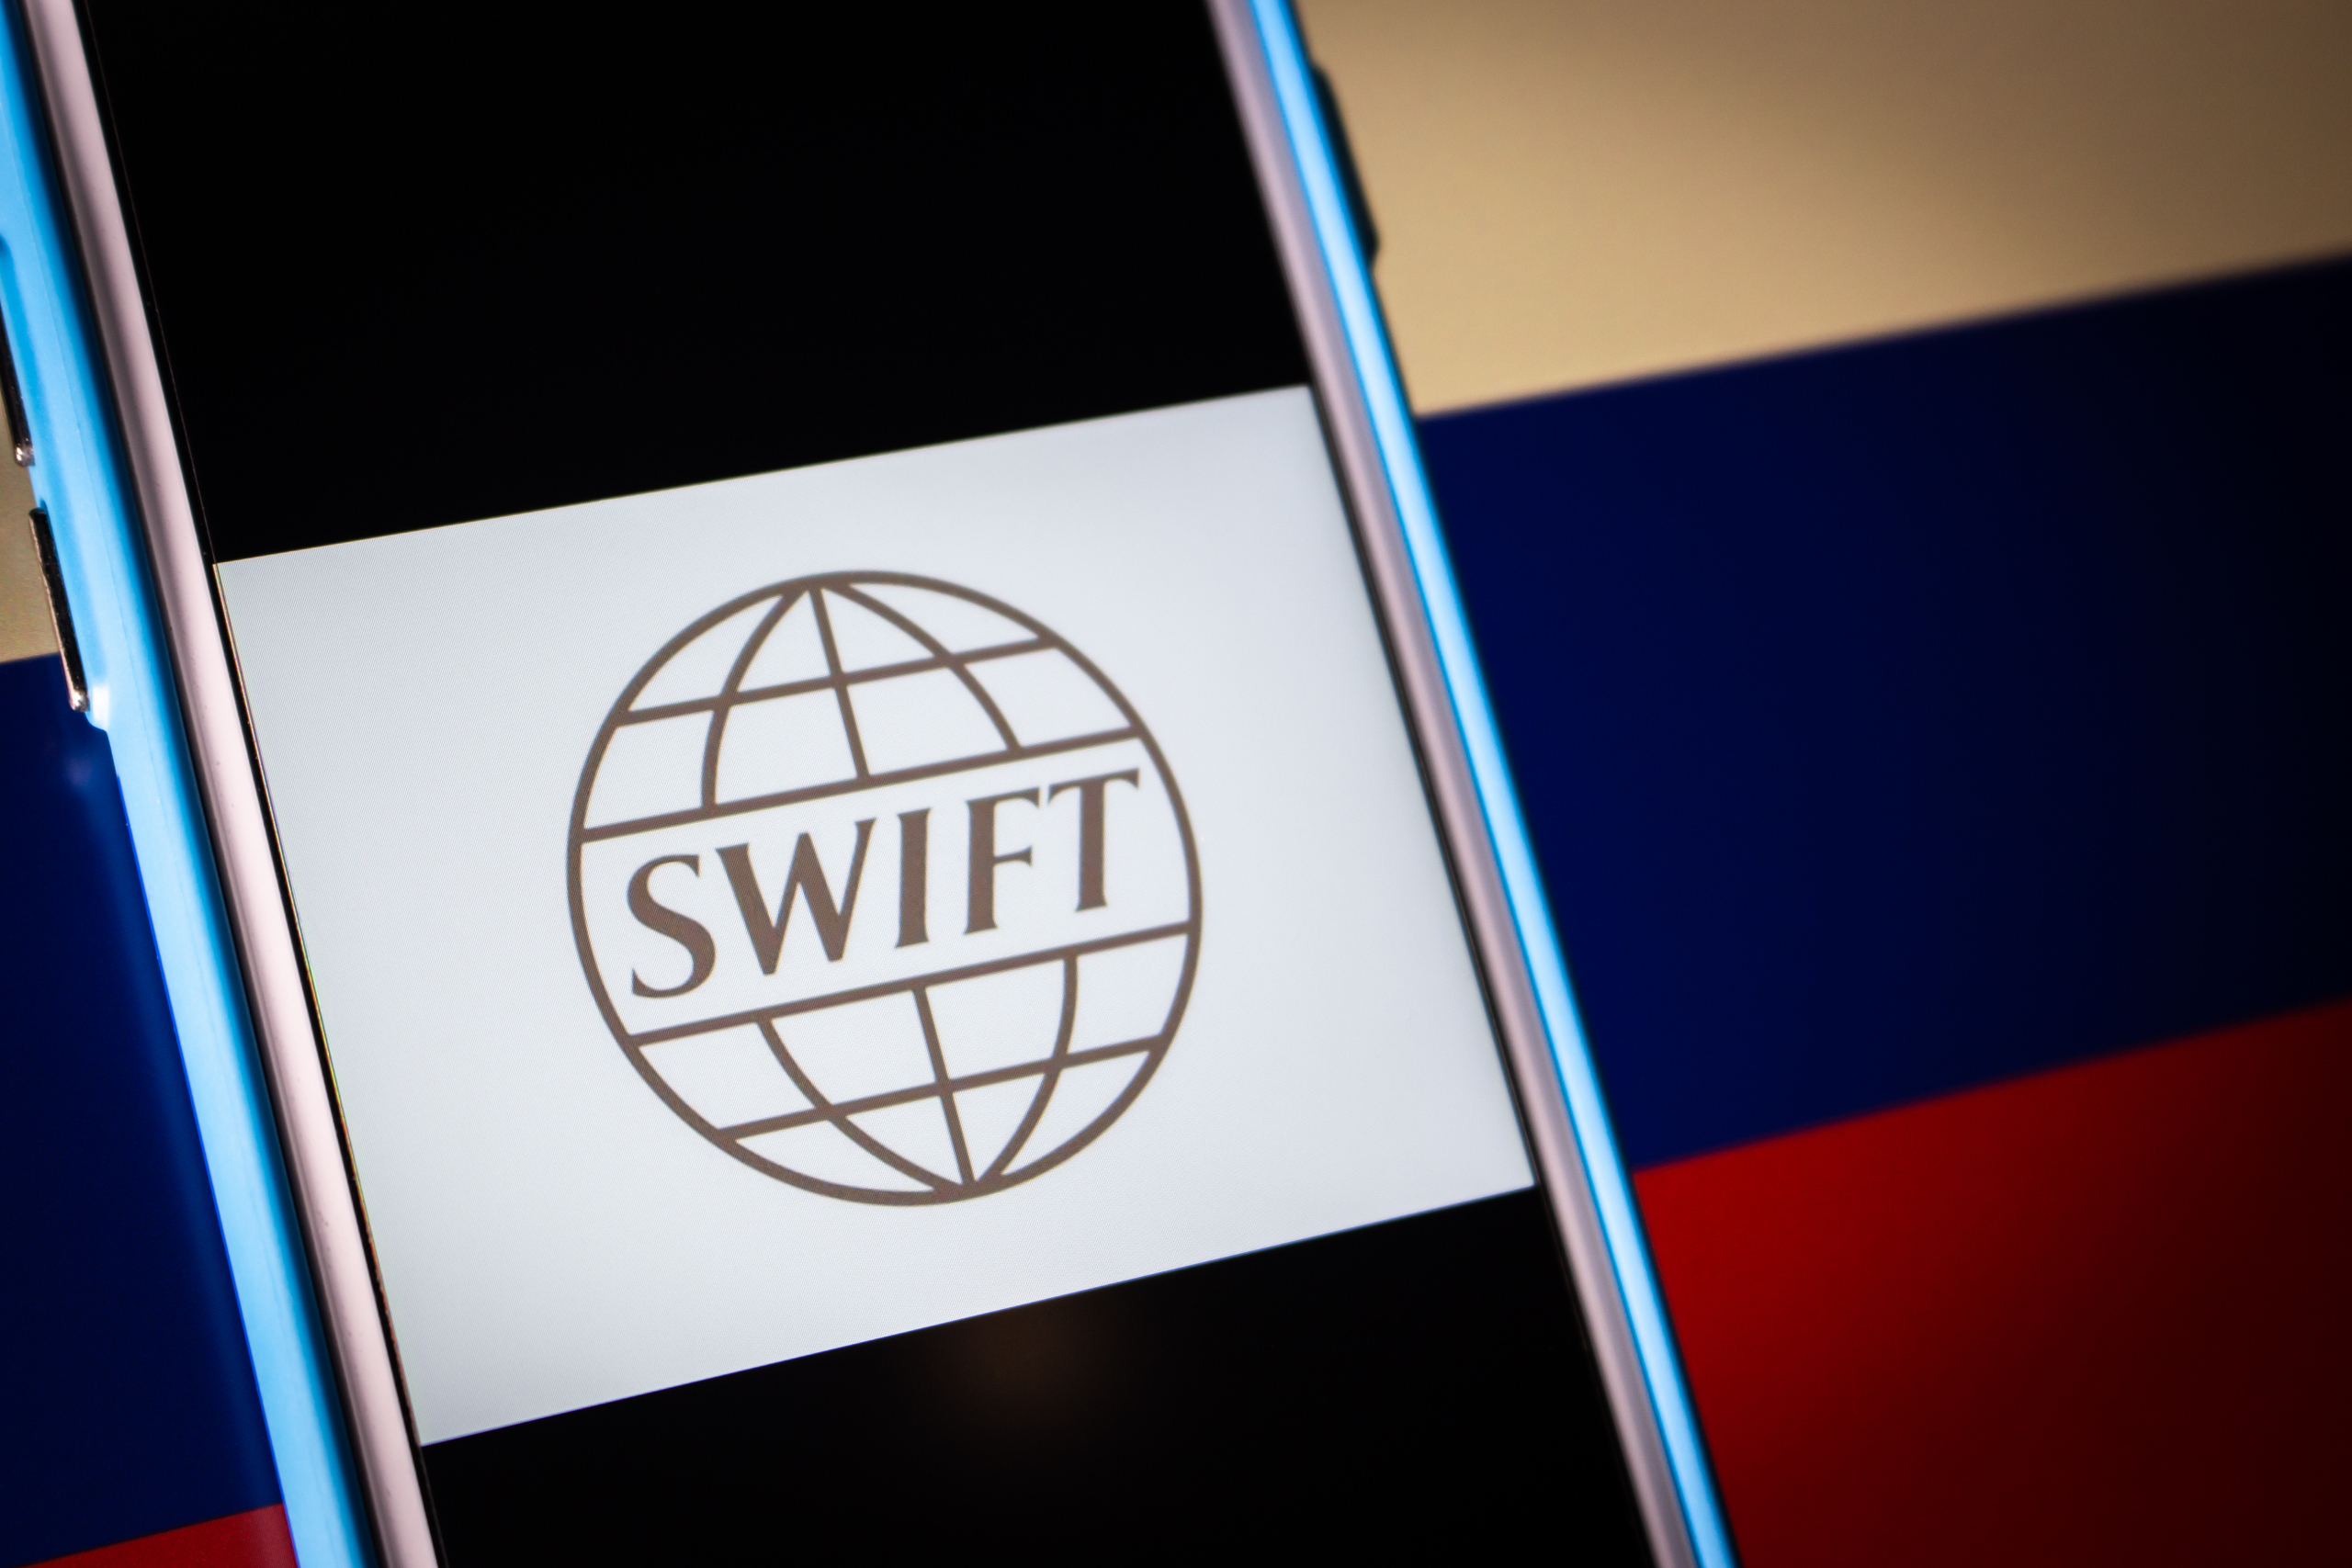 Russia Develops Blockchain System To Replace Swift
